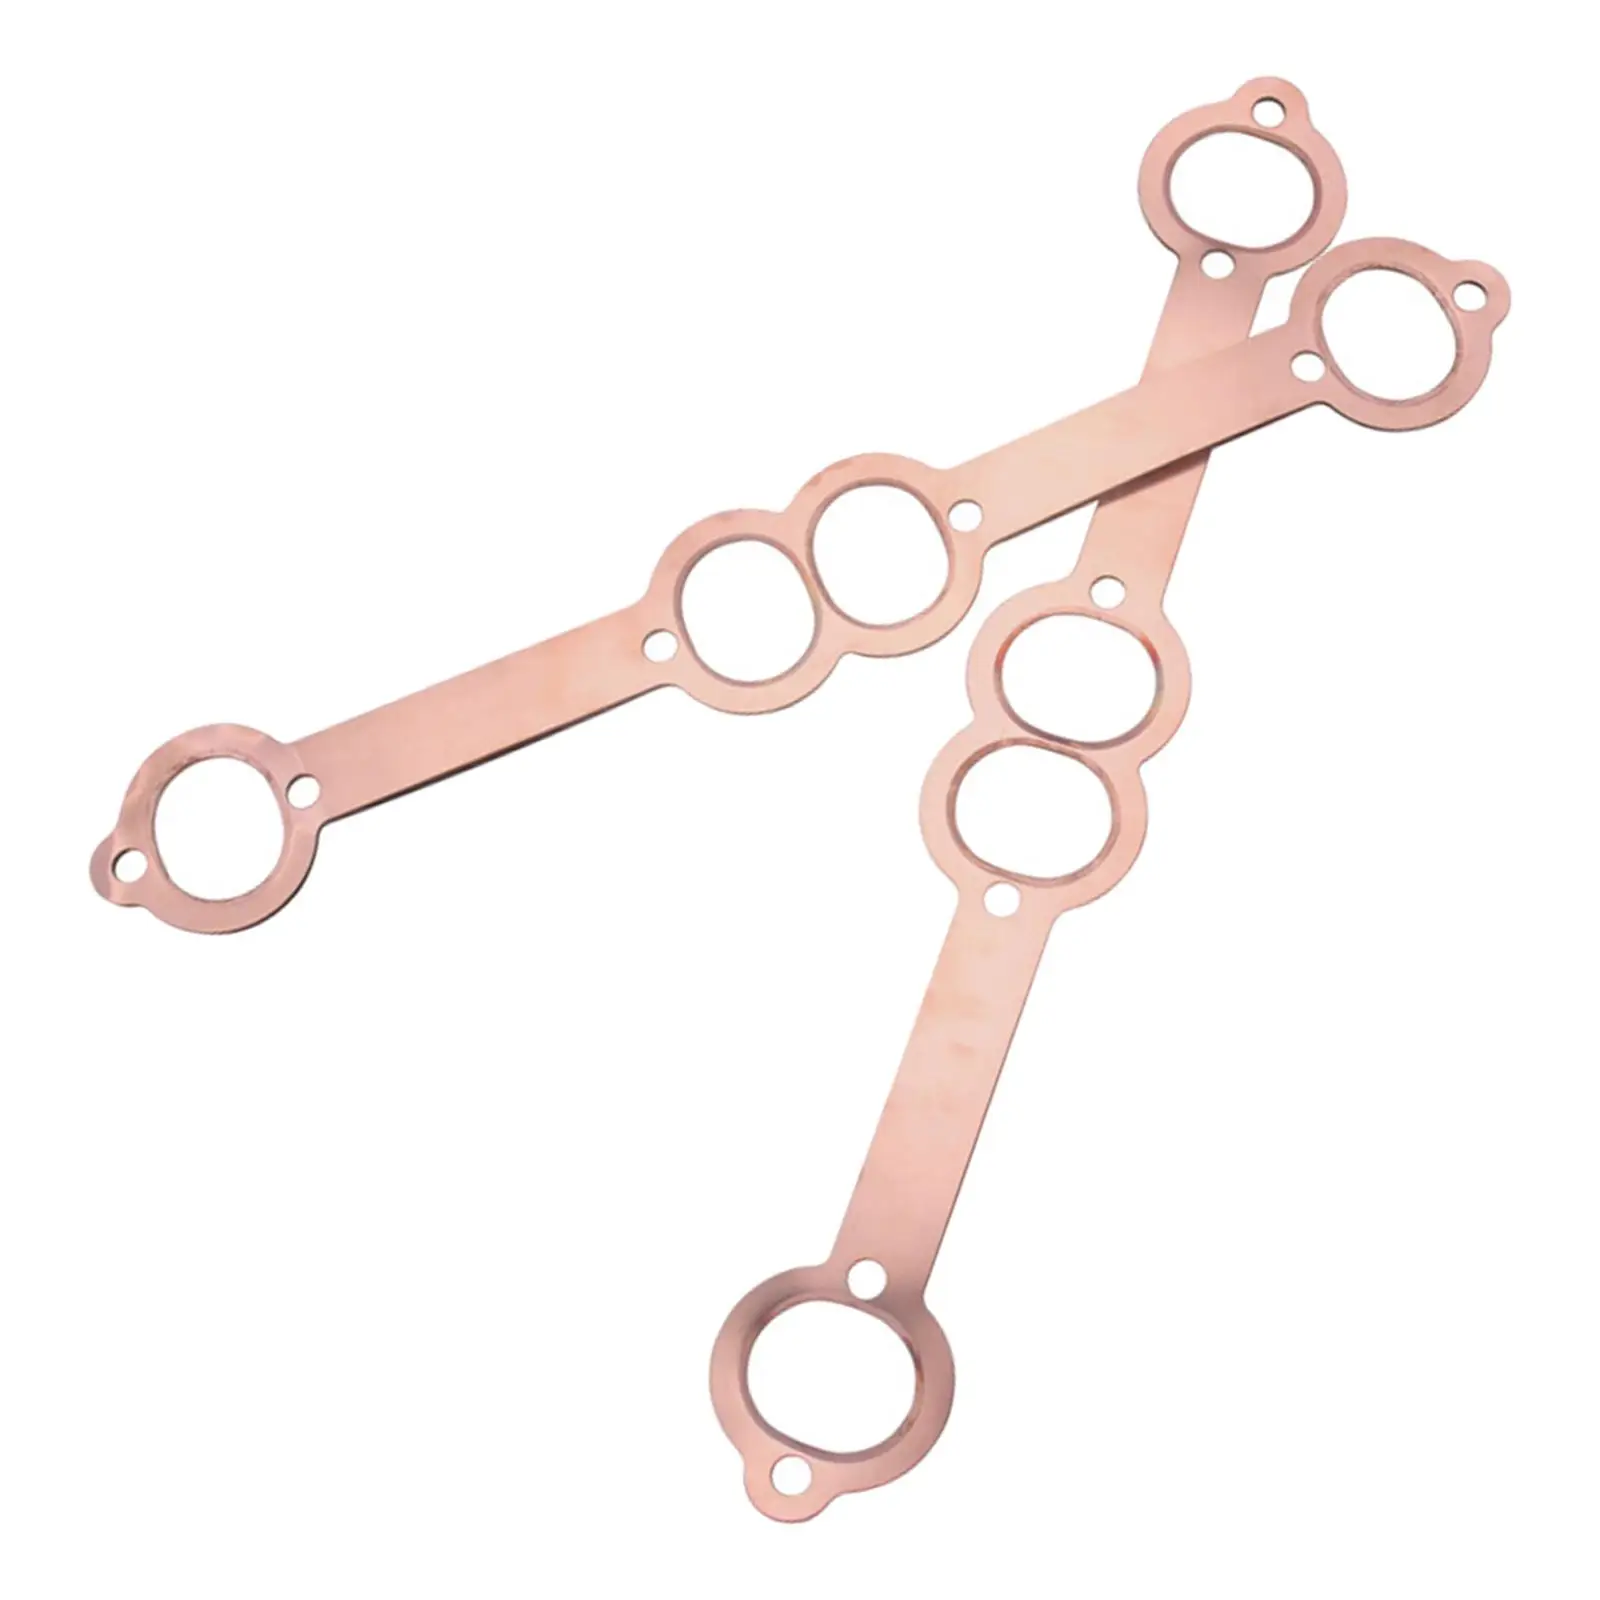 2Pcs Auto Sbc Copper Header Exhaust Gaskets for 350 283 383